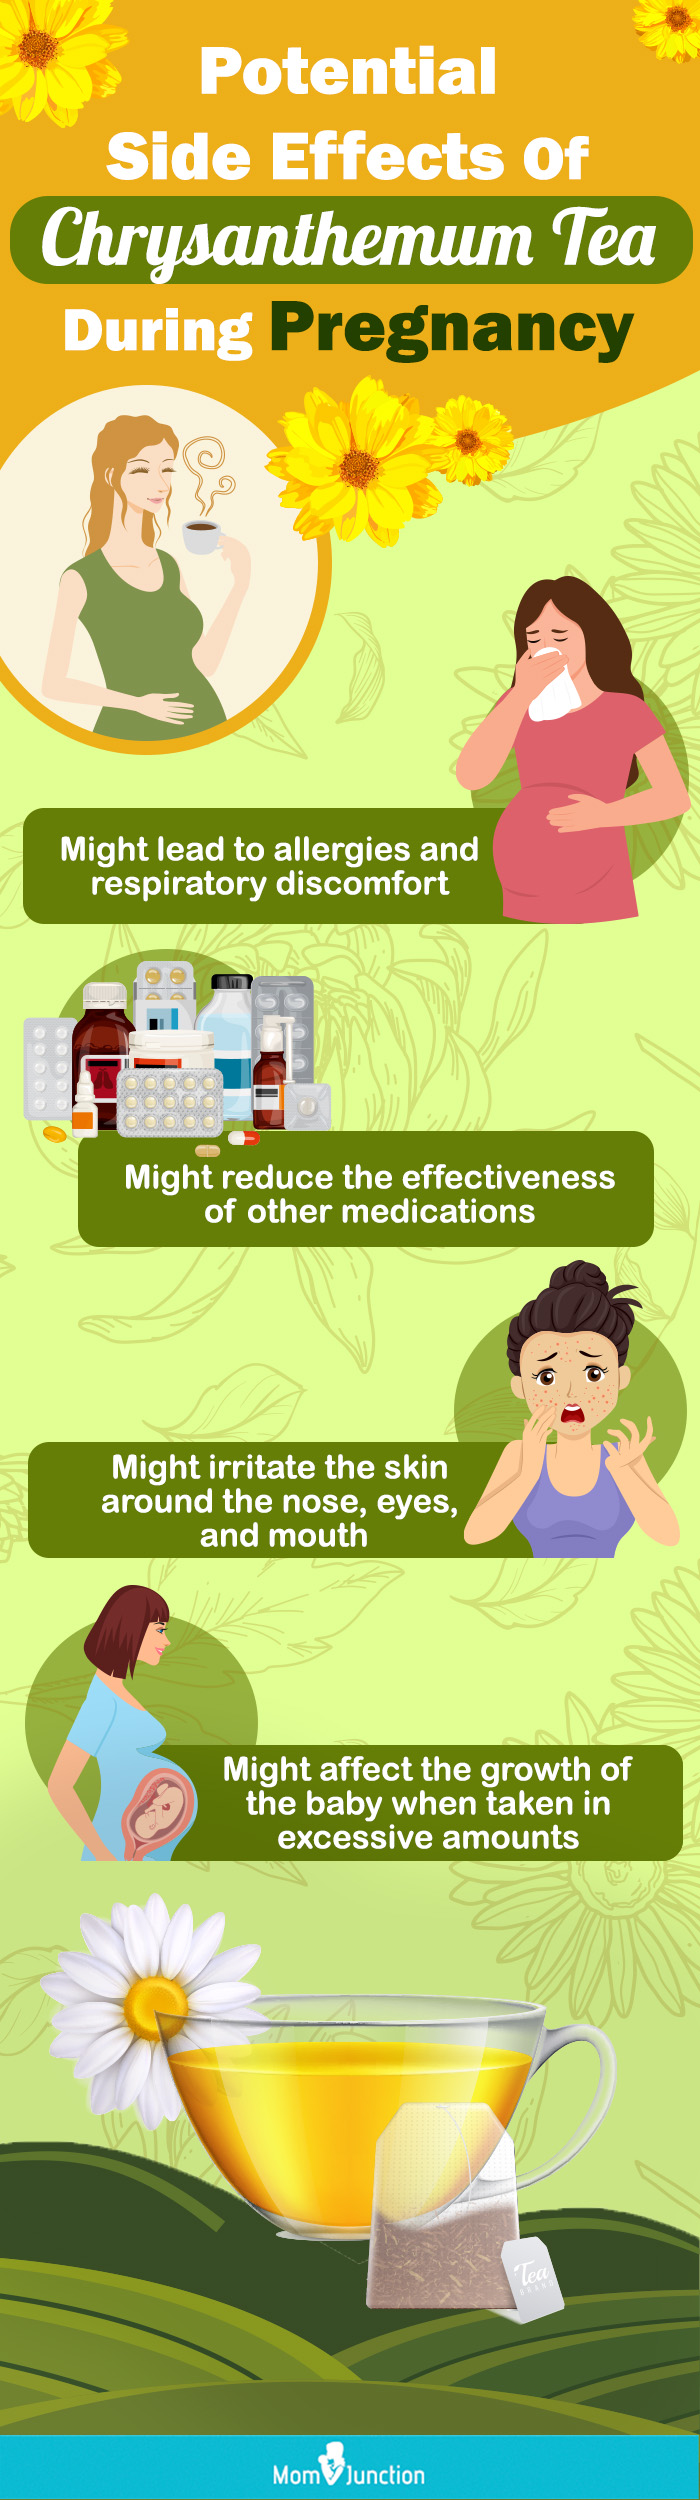 potential side effects of chrysanthemum tea during pregnancy (infographic)